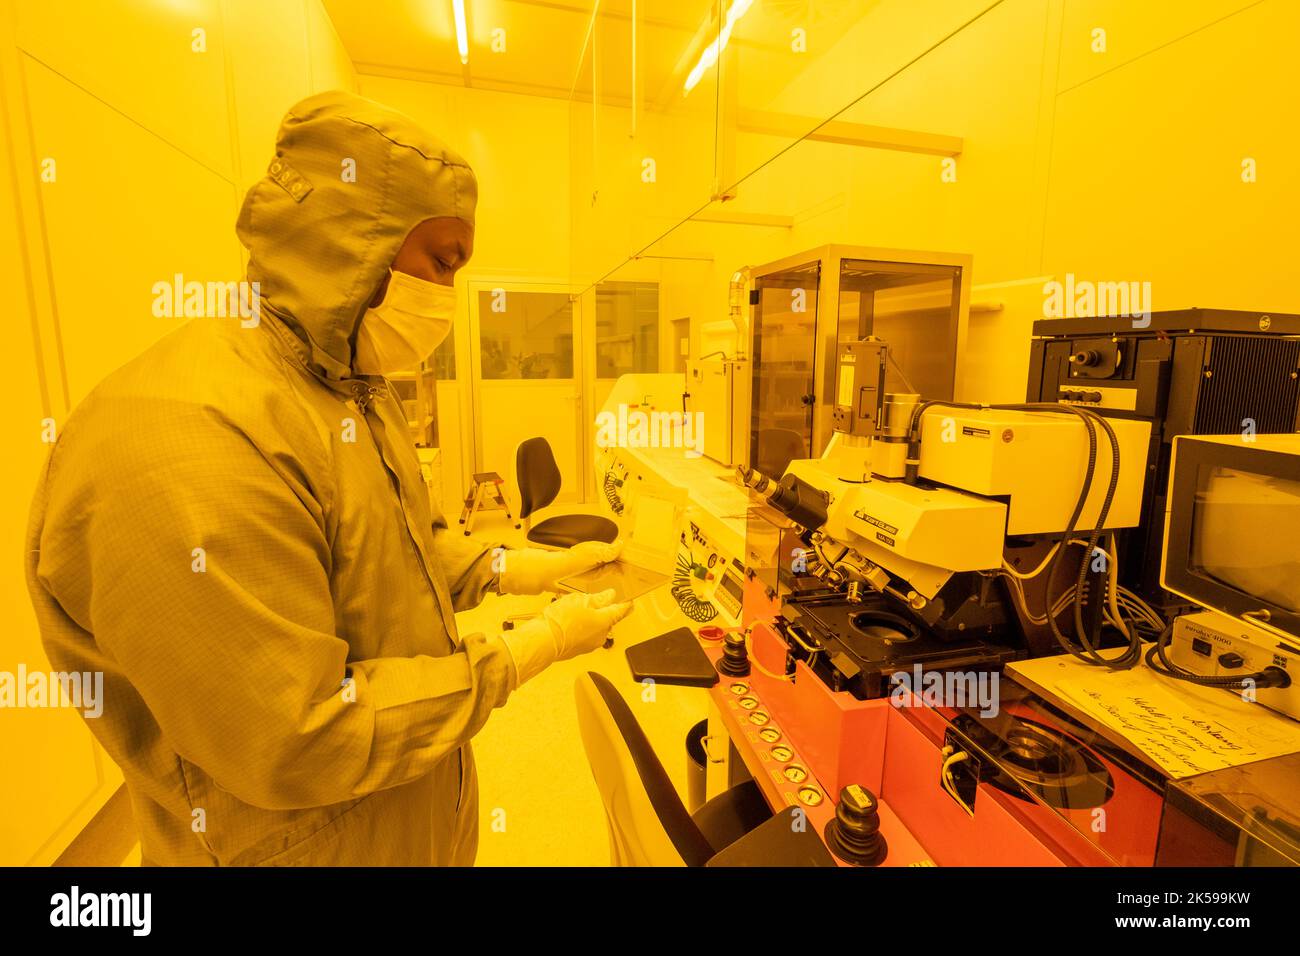 31.05.2022, Germany, Lower Saxony, Hannover - Laboratory for Nano- and Quantum Engineering (LNQE), interdisciplinary research center of Leibniz Univer Stock Photo